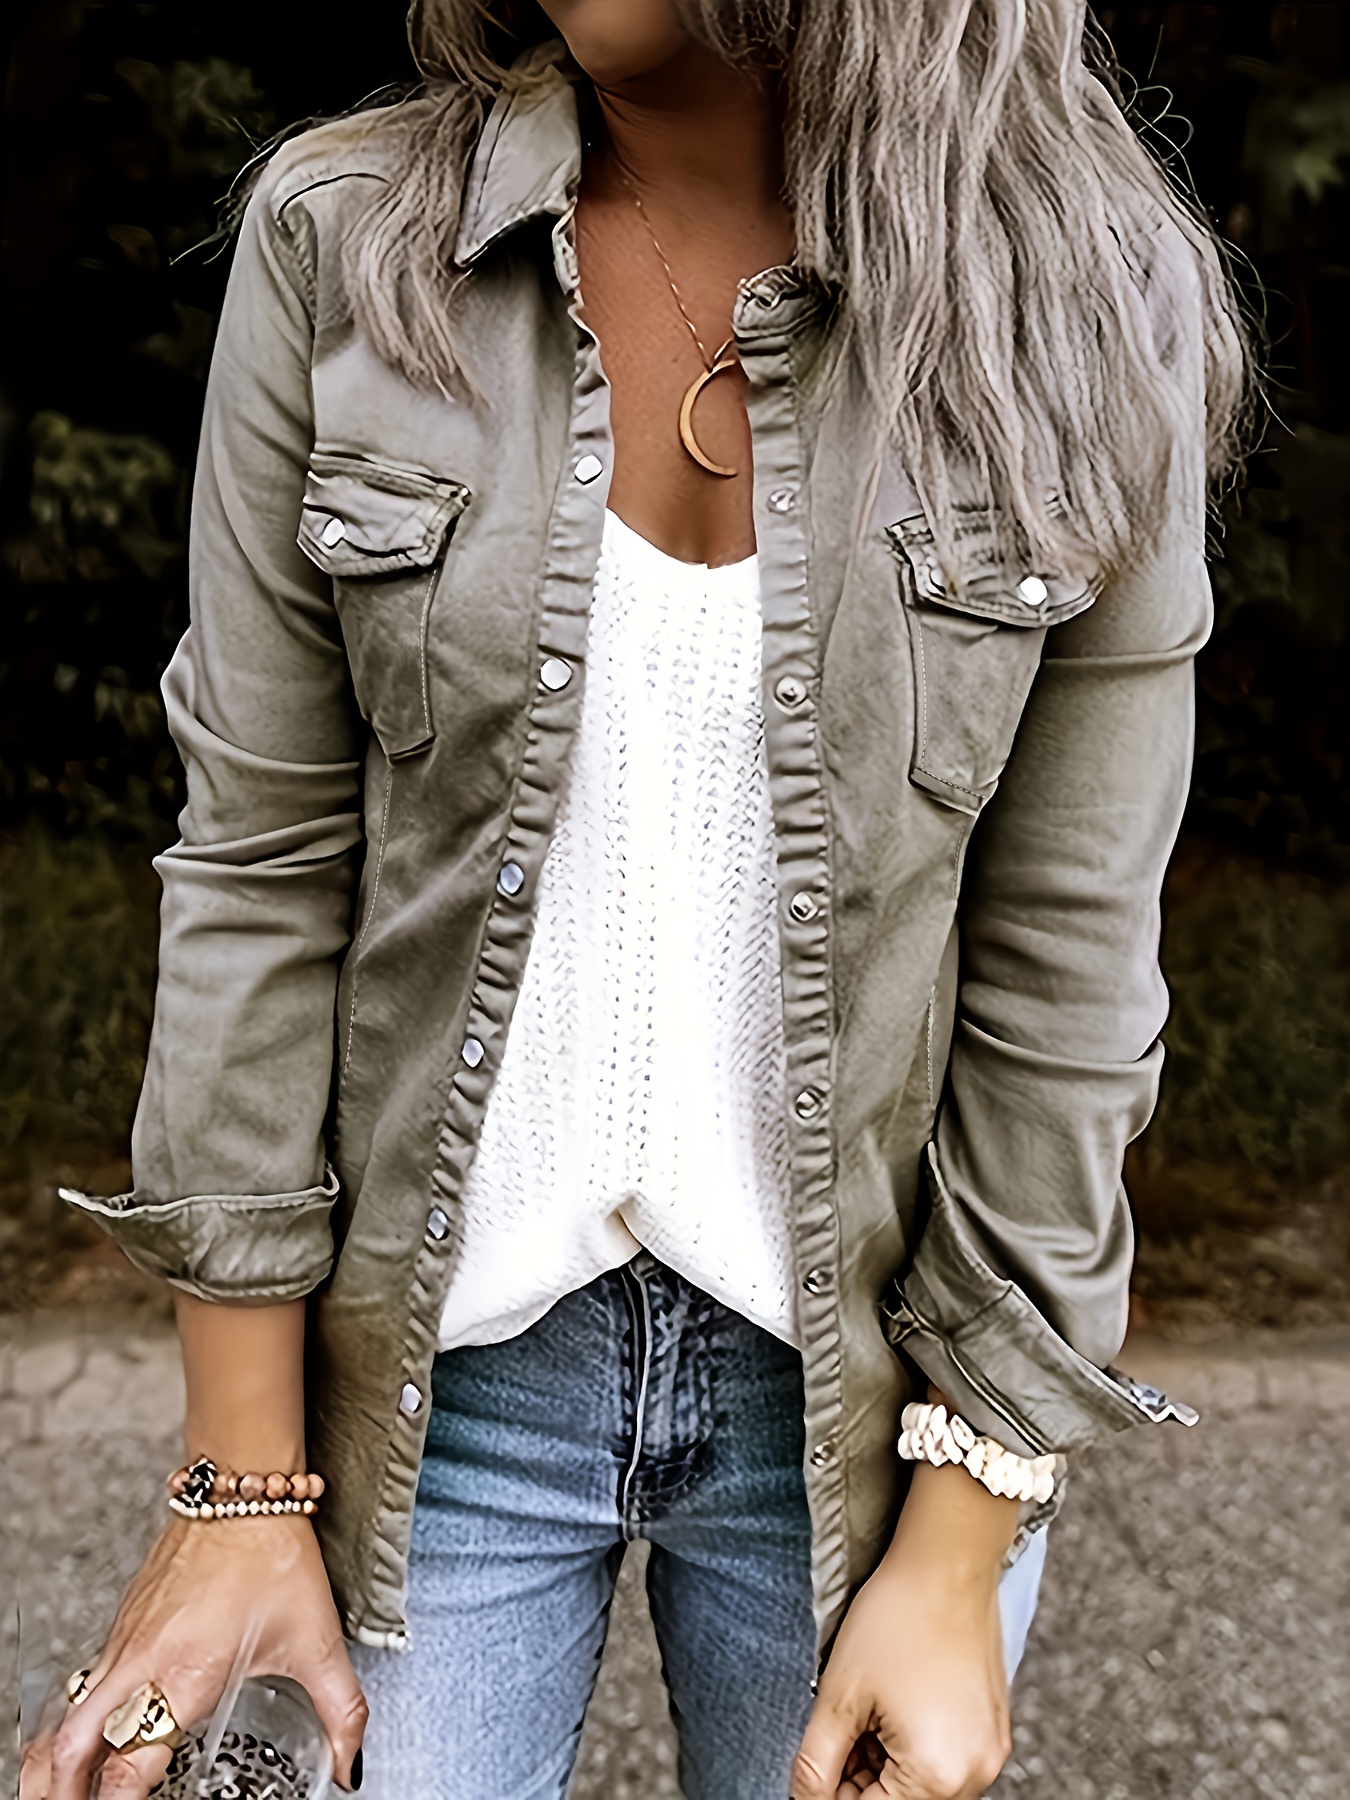 stylish denim safari top button up ruched trim long sleeve collared shirt casual light jacket tops womens clothing details 10